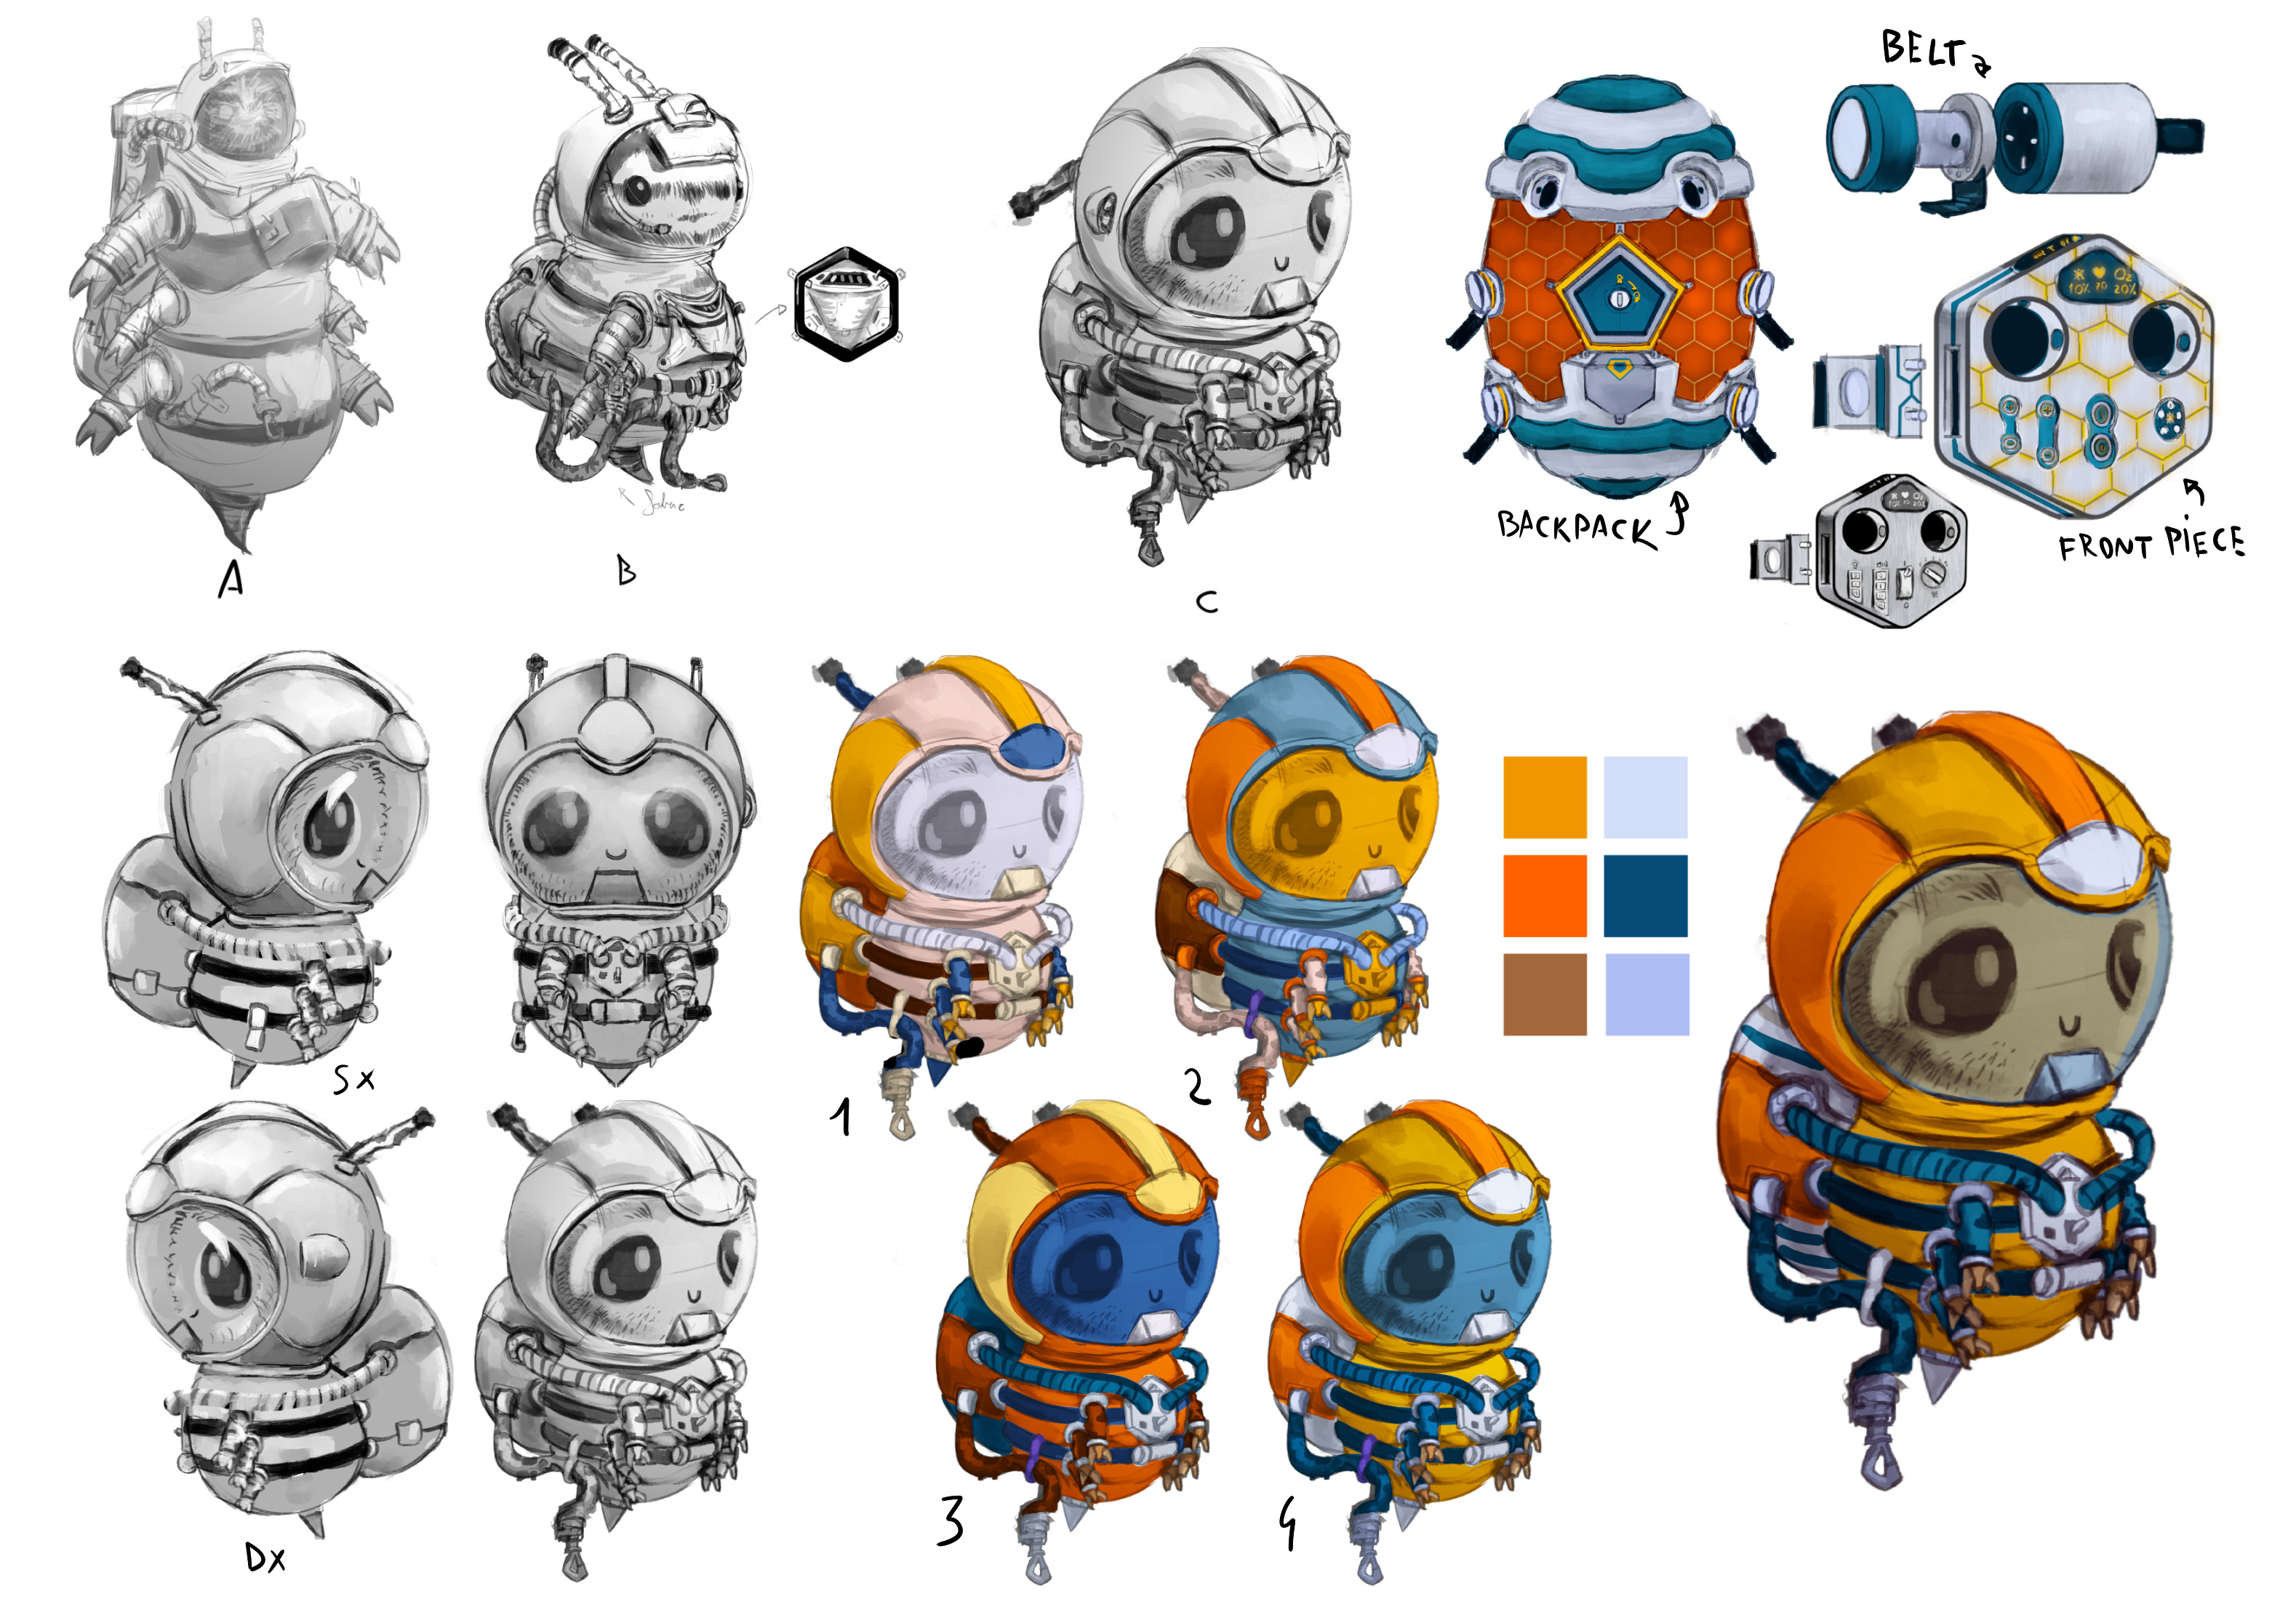 Concept of the space bee